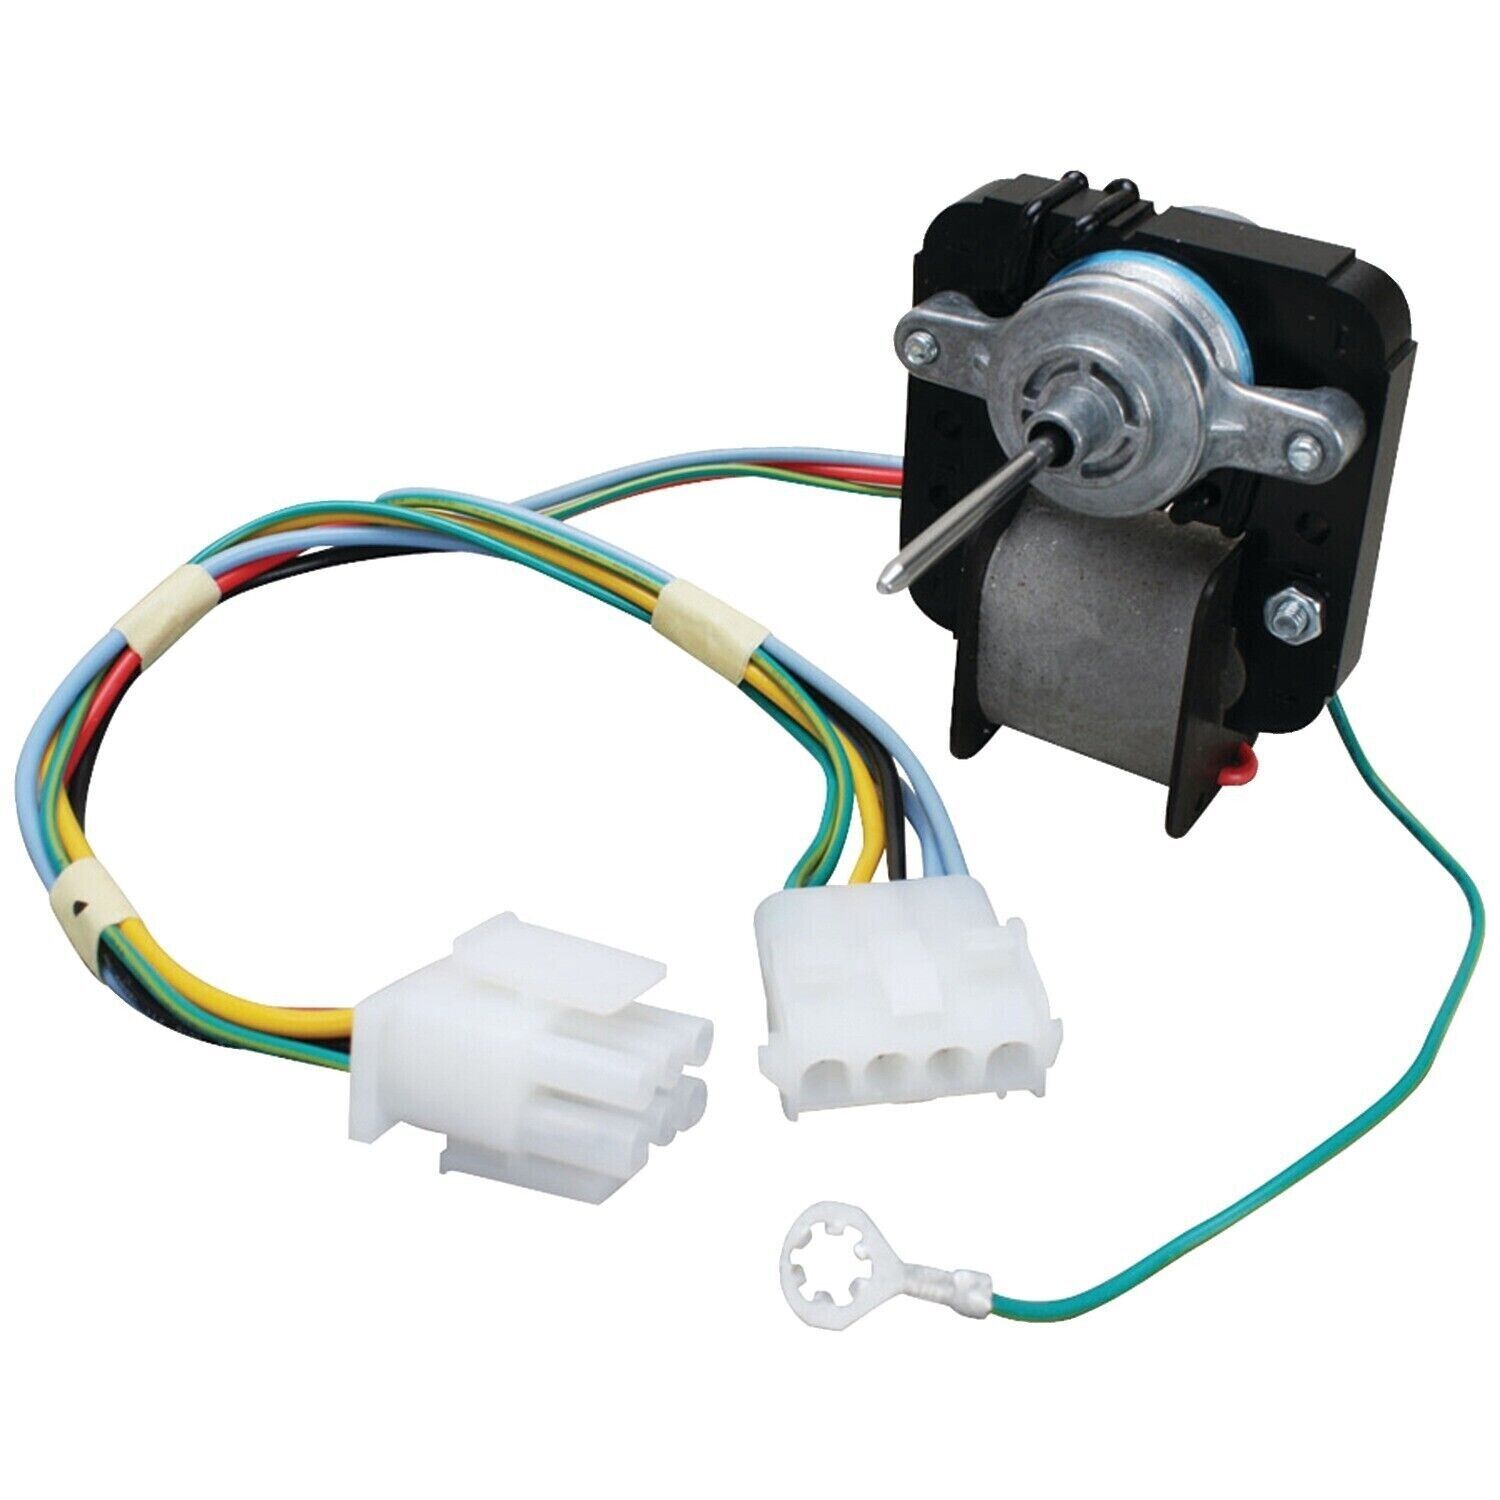 Primary image for OEM Fan Motor Kit For Kenmore 25373072300 2535466940A 25352349302 25356943602